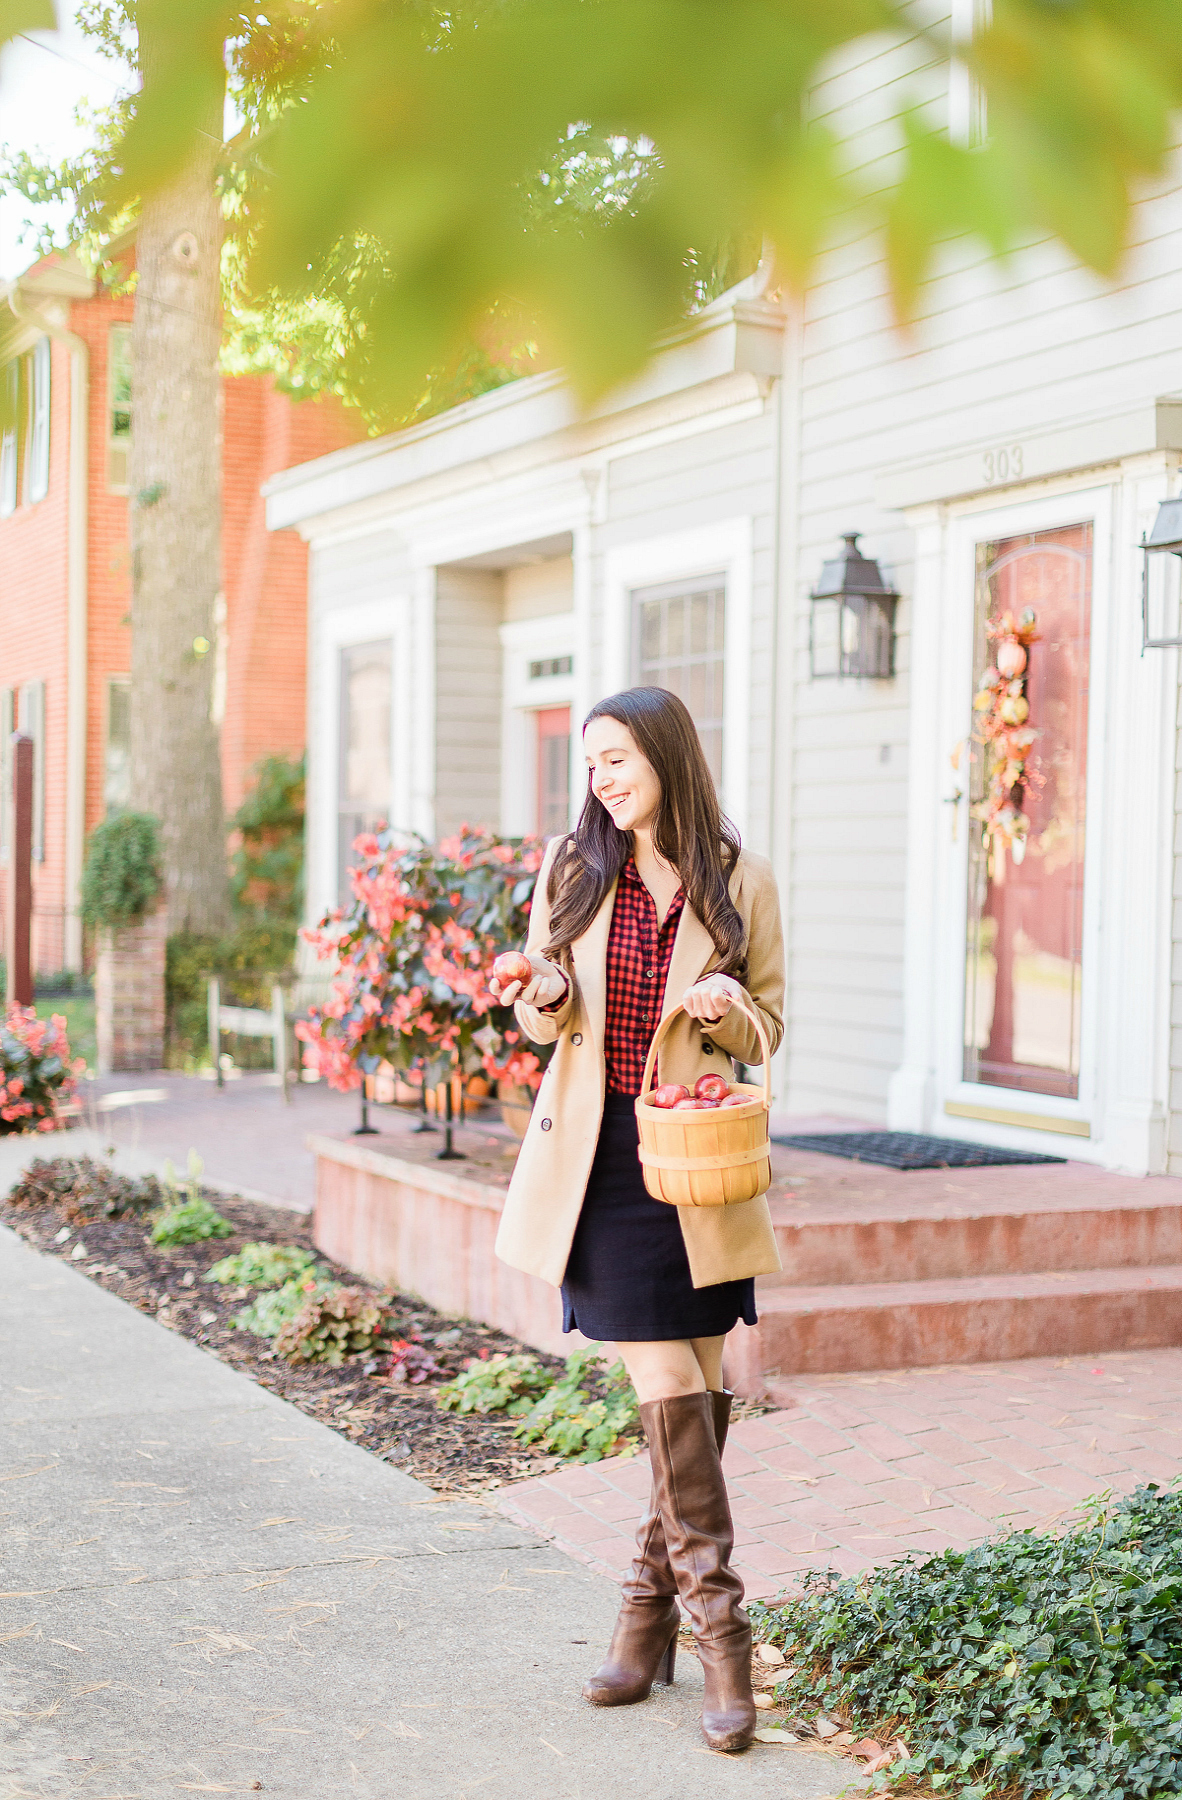 4 Preppy Fall Essentials to Add to Your Cold Weather Wardrobe by affordable style blogger Stephanie Ziajka from Diary of a Debutante, cute preppy fall outfits, LL Bean red gingham button down styled with a Shein double breasted camel coat, J.Crew Factory navy wool skirt, and Nine West block heel tall boots